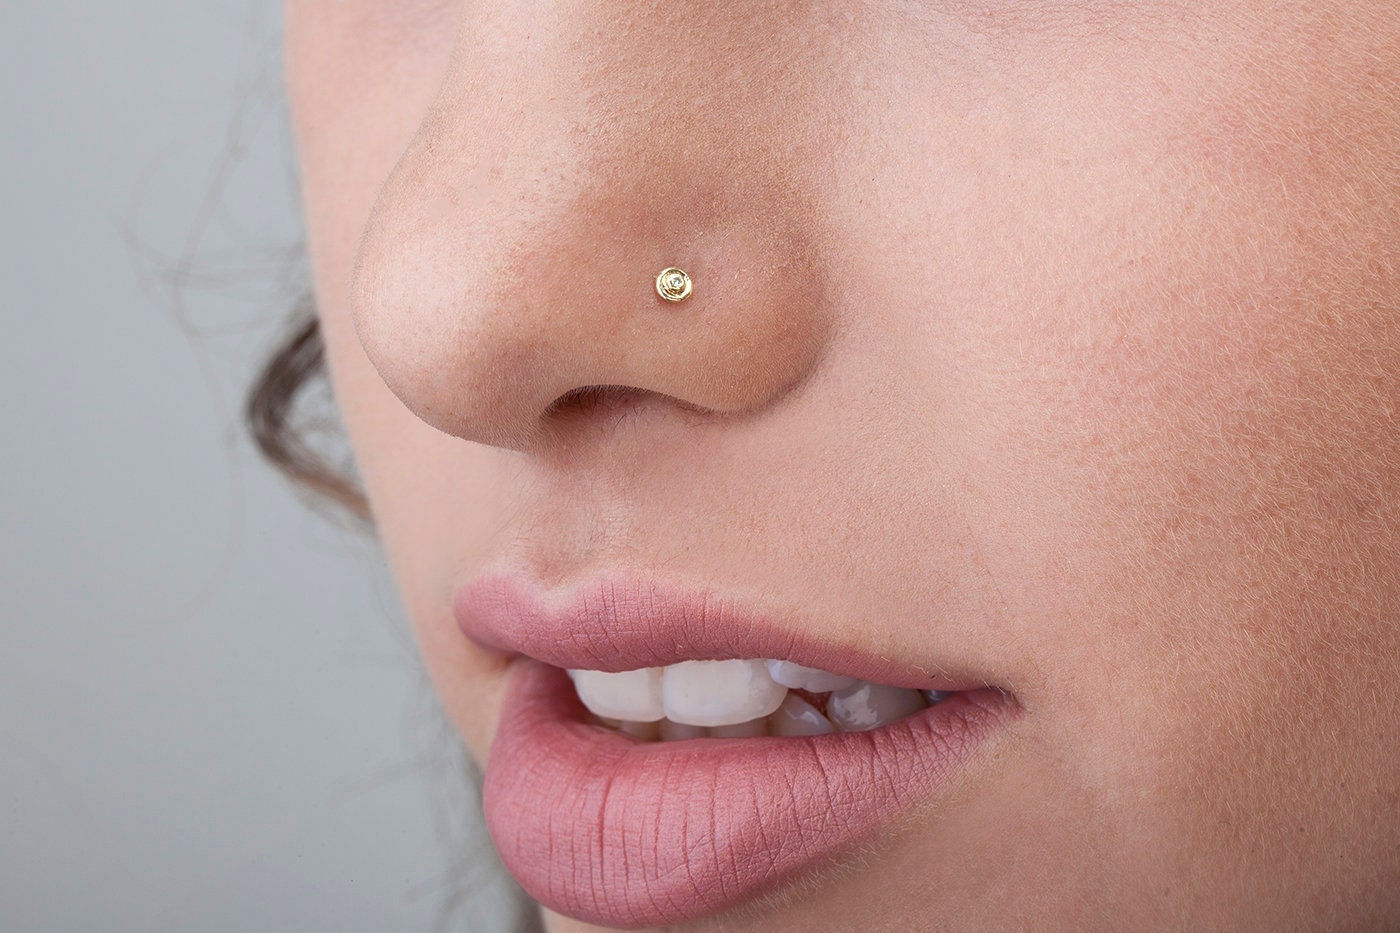 Nose Piercing 101: Pain, Pricing, Aftercare and More, Explained | Glamour UK